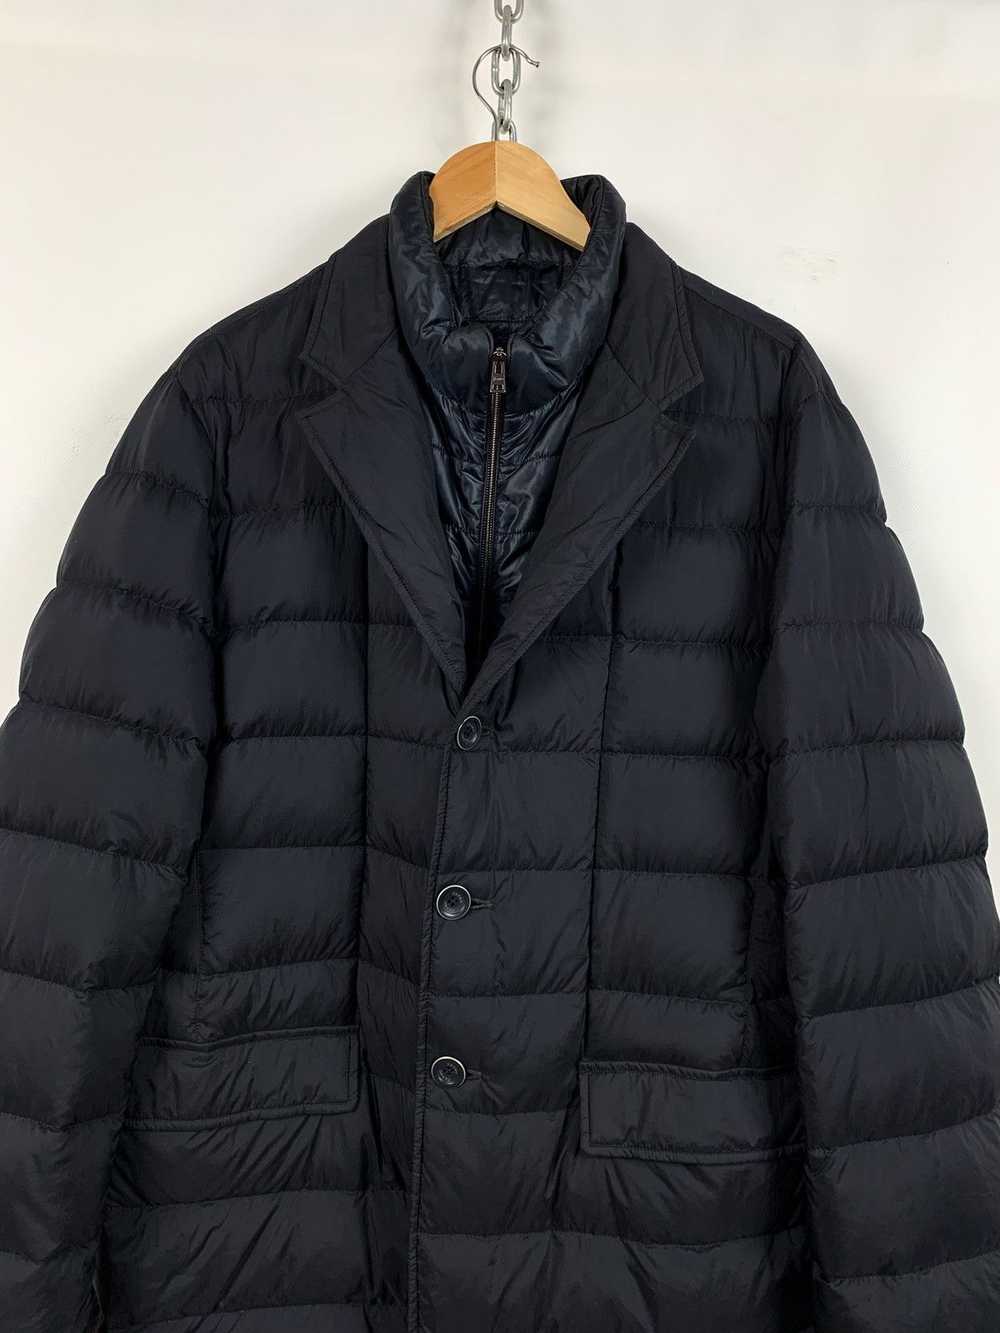 Herno Herno Navy Blue Quilted Down Jacket - image 5